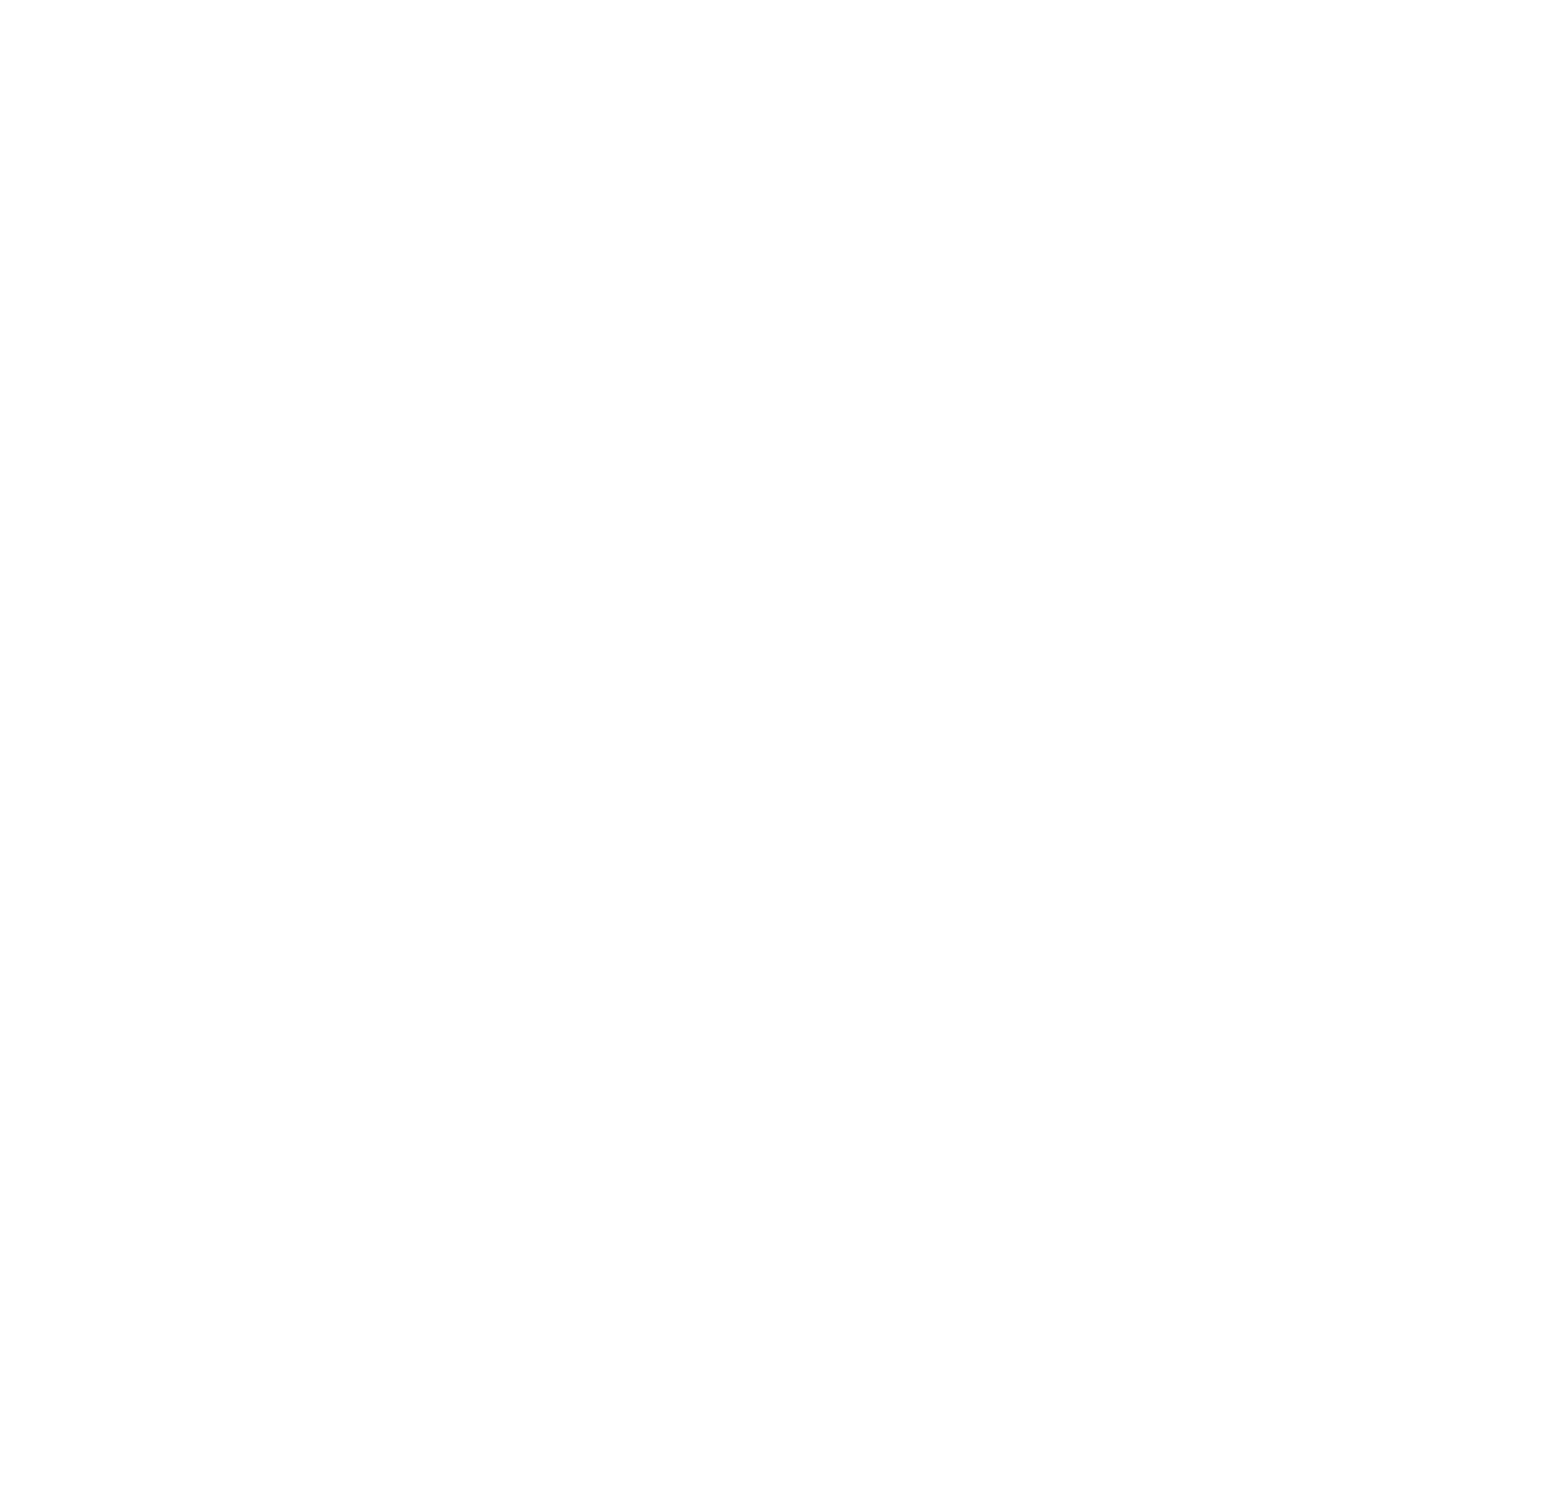 Tenable logo for dark backgrounds (transparent PNG)